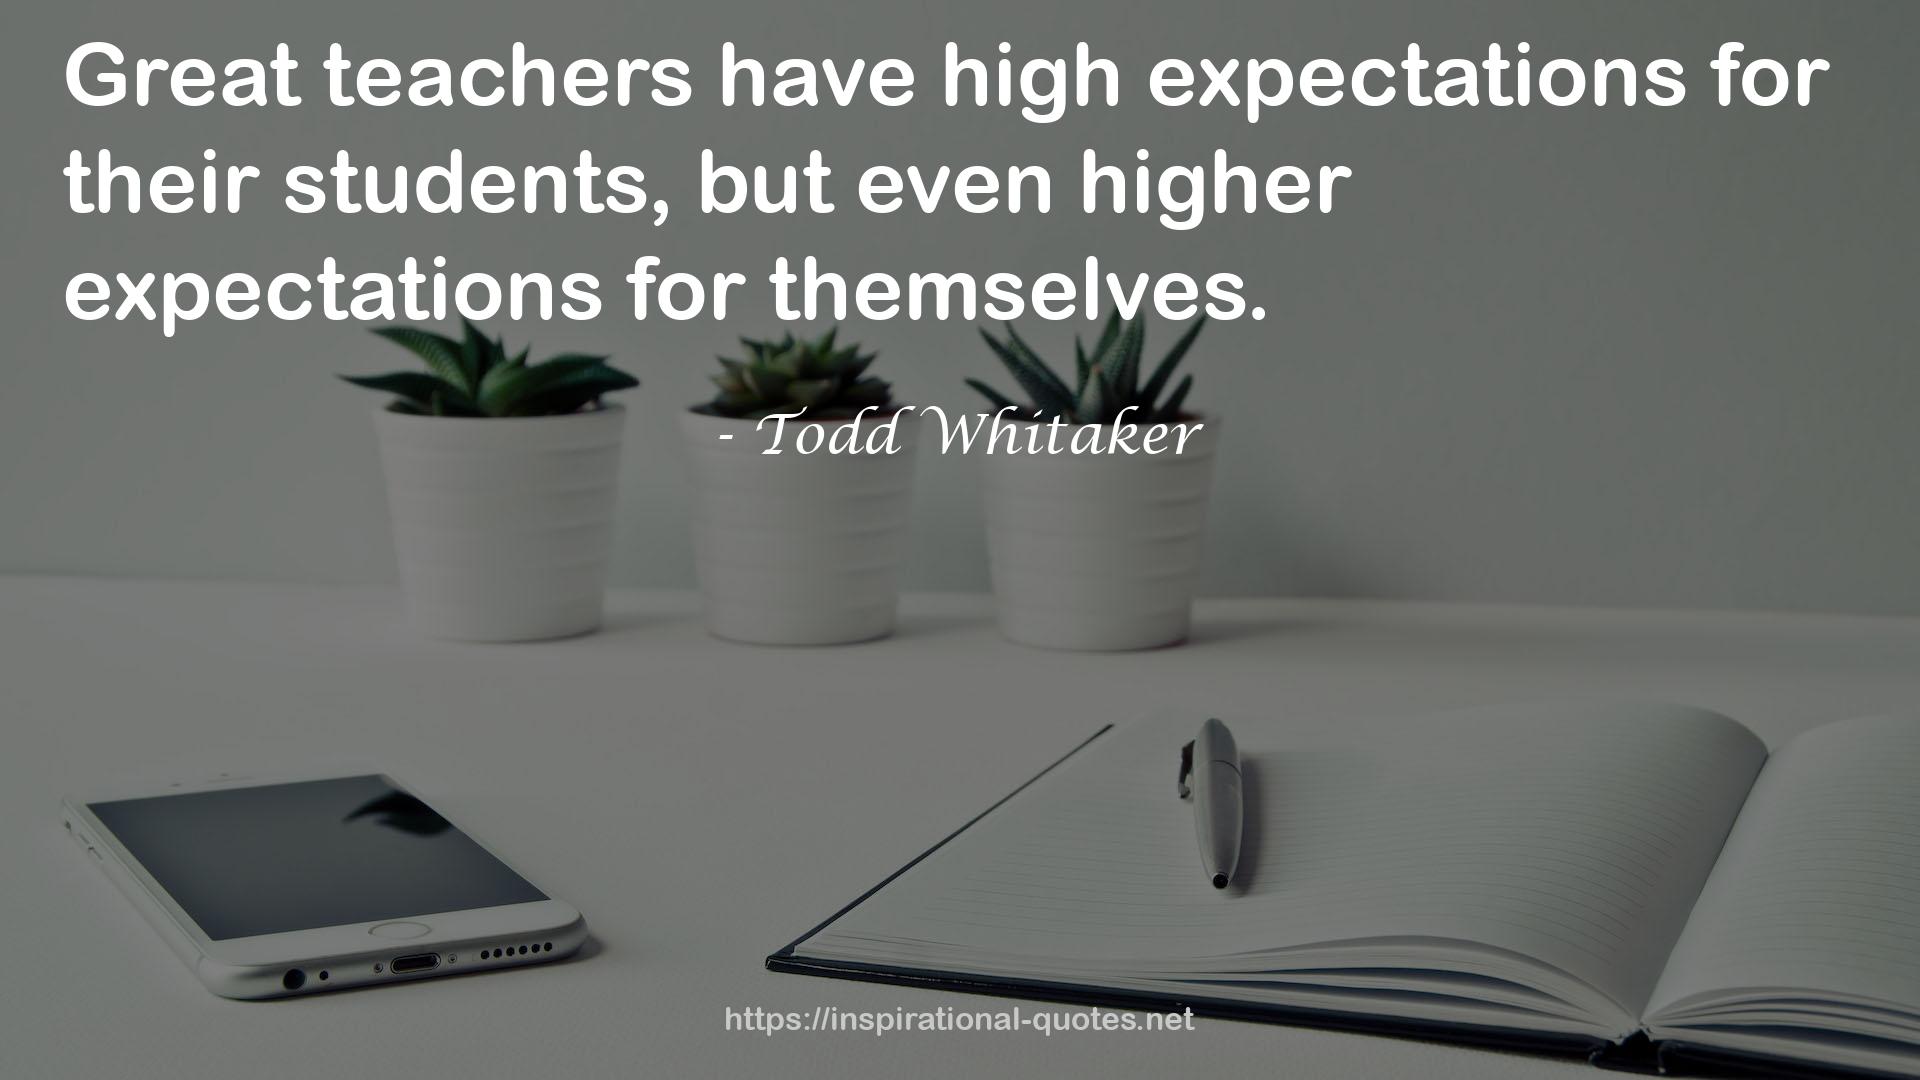 Todd Whitaker QUOTES